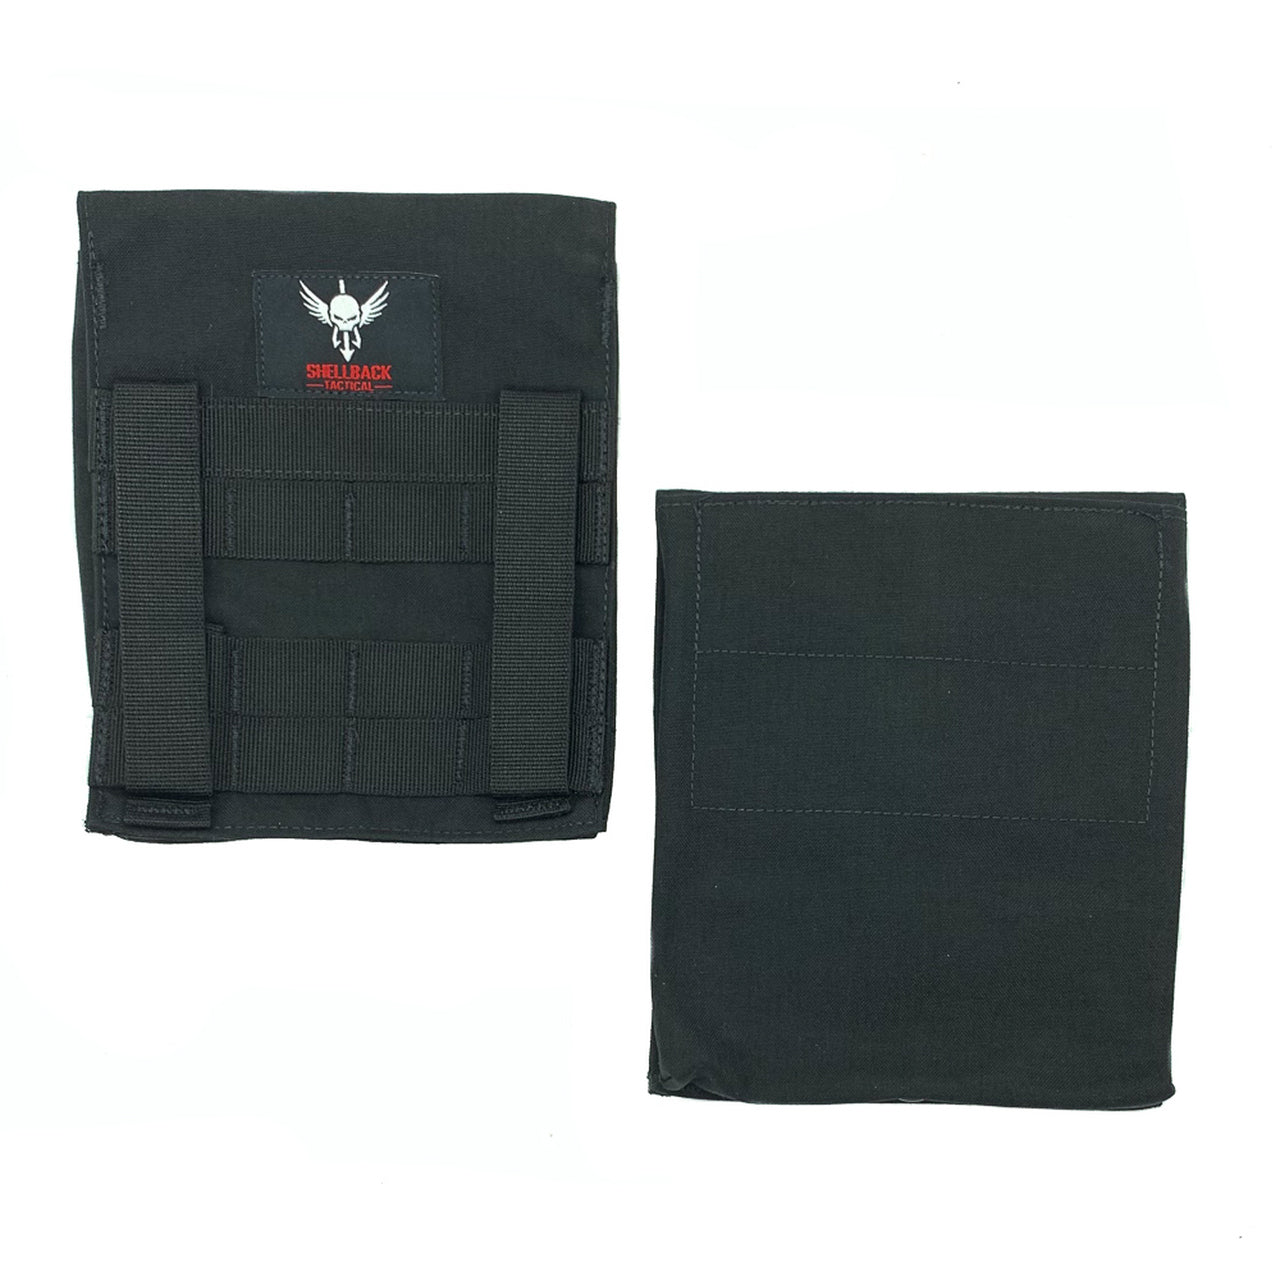 Two Shellback Tactical Side Plate Pockets 2.0 - Set of 2 on a white background.